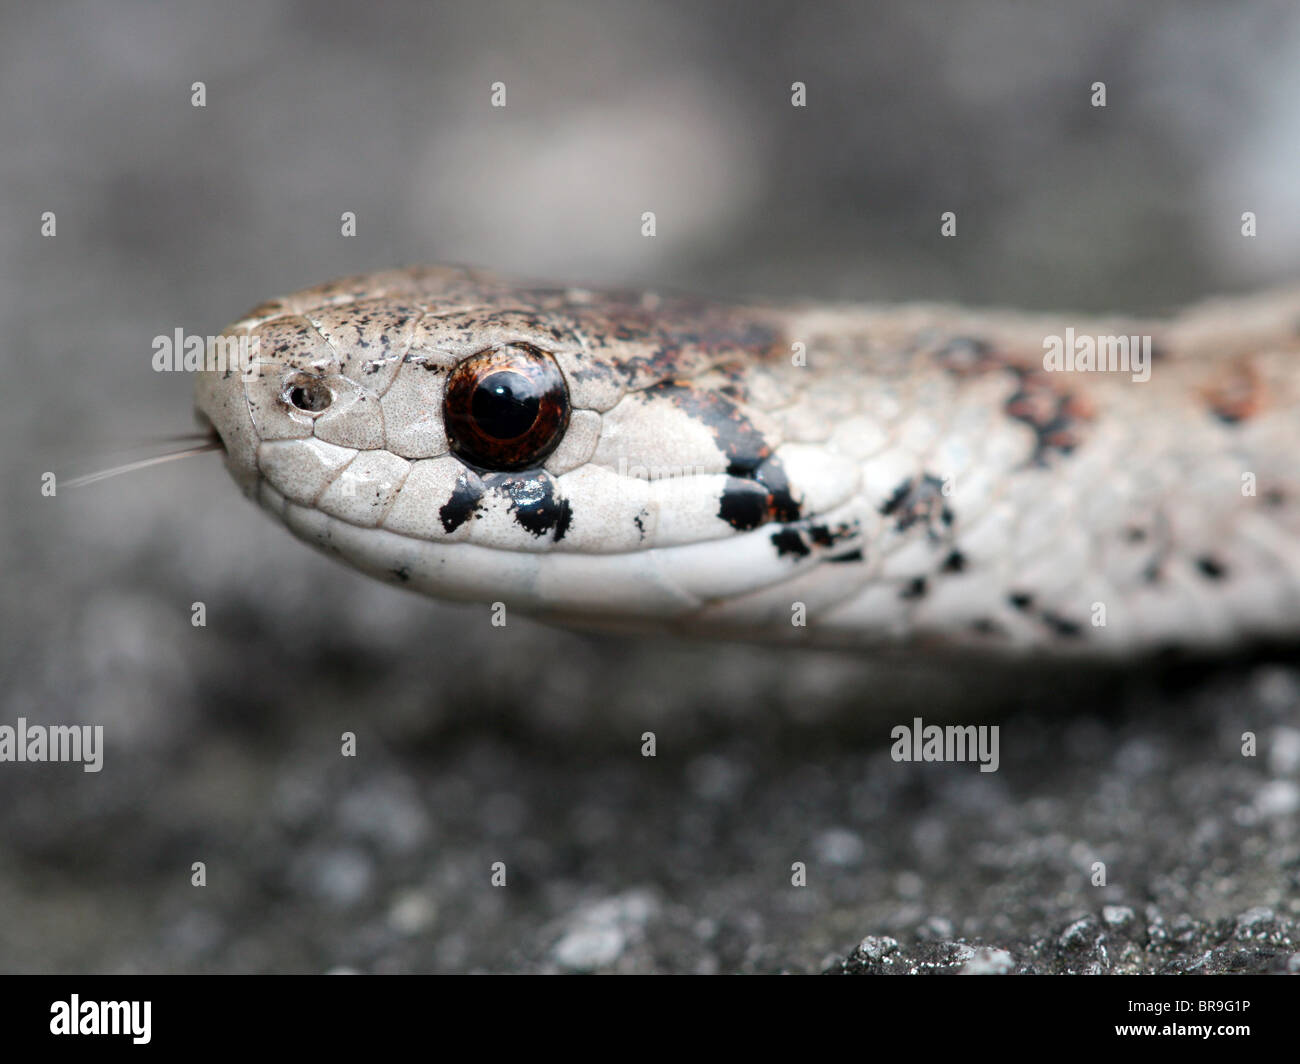 A Close-up of a Northern Brown or DeKay's Snake (Storeria dekayi) Stock Photo